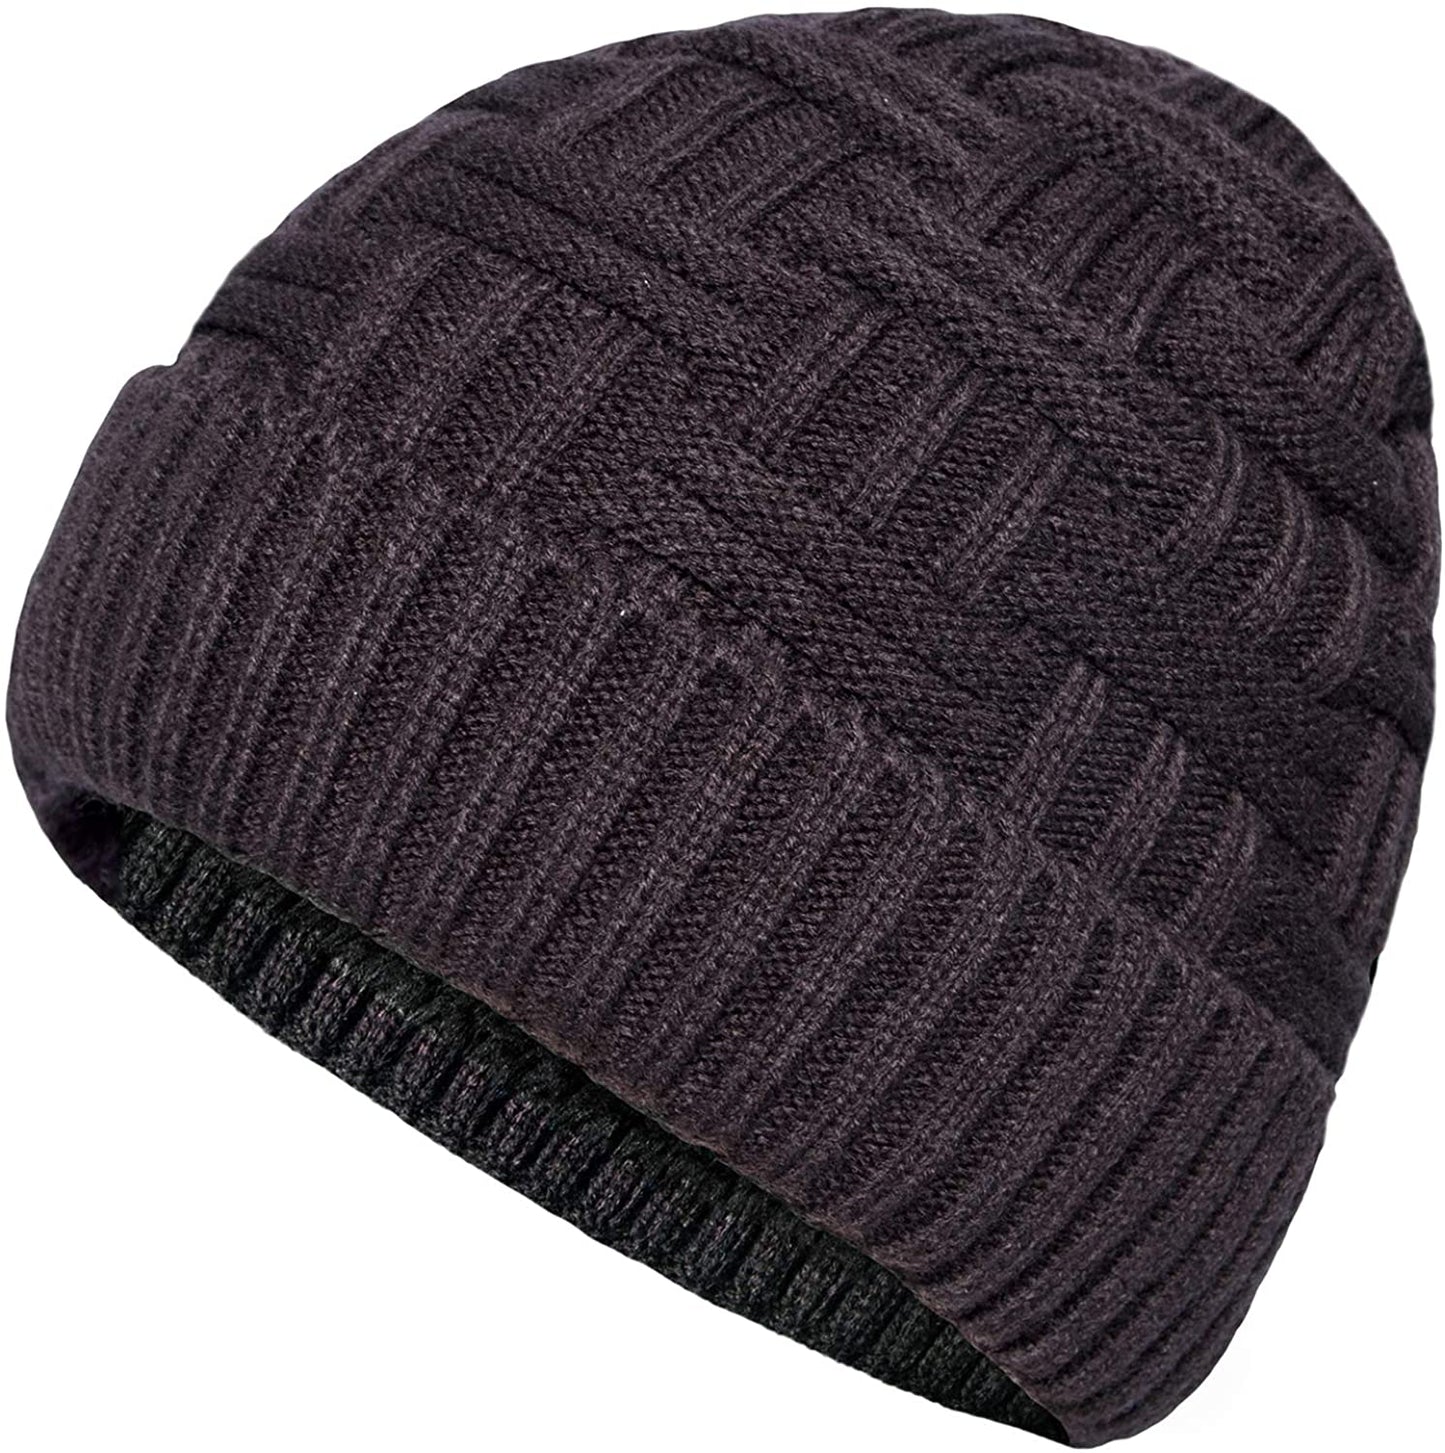 Winter Warm Knitted Wool Thick Baggy Slouchy Beanie Skull Cap